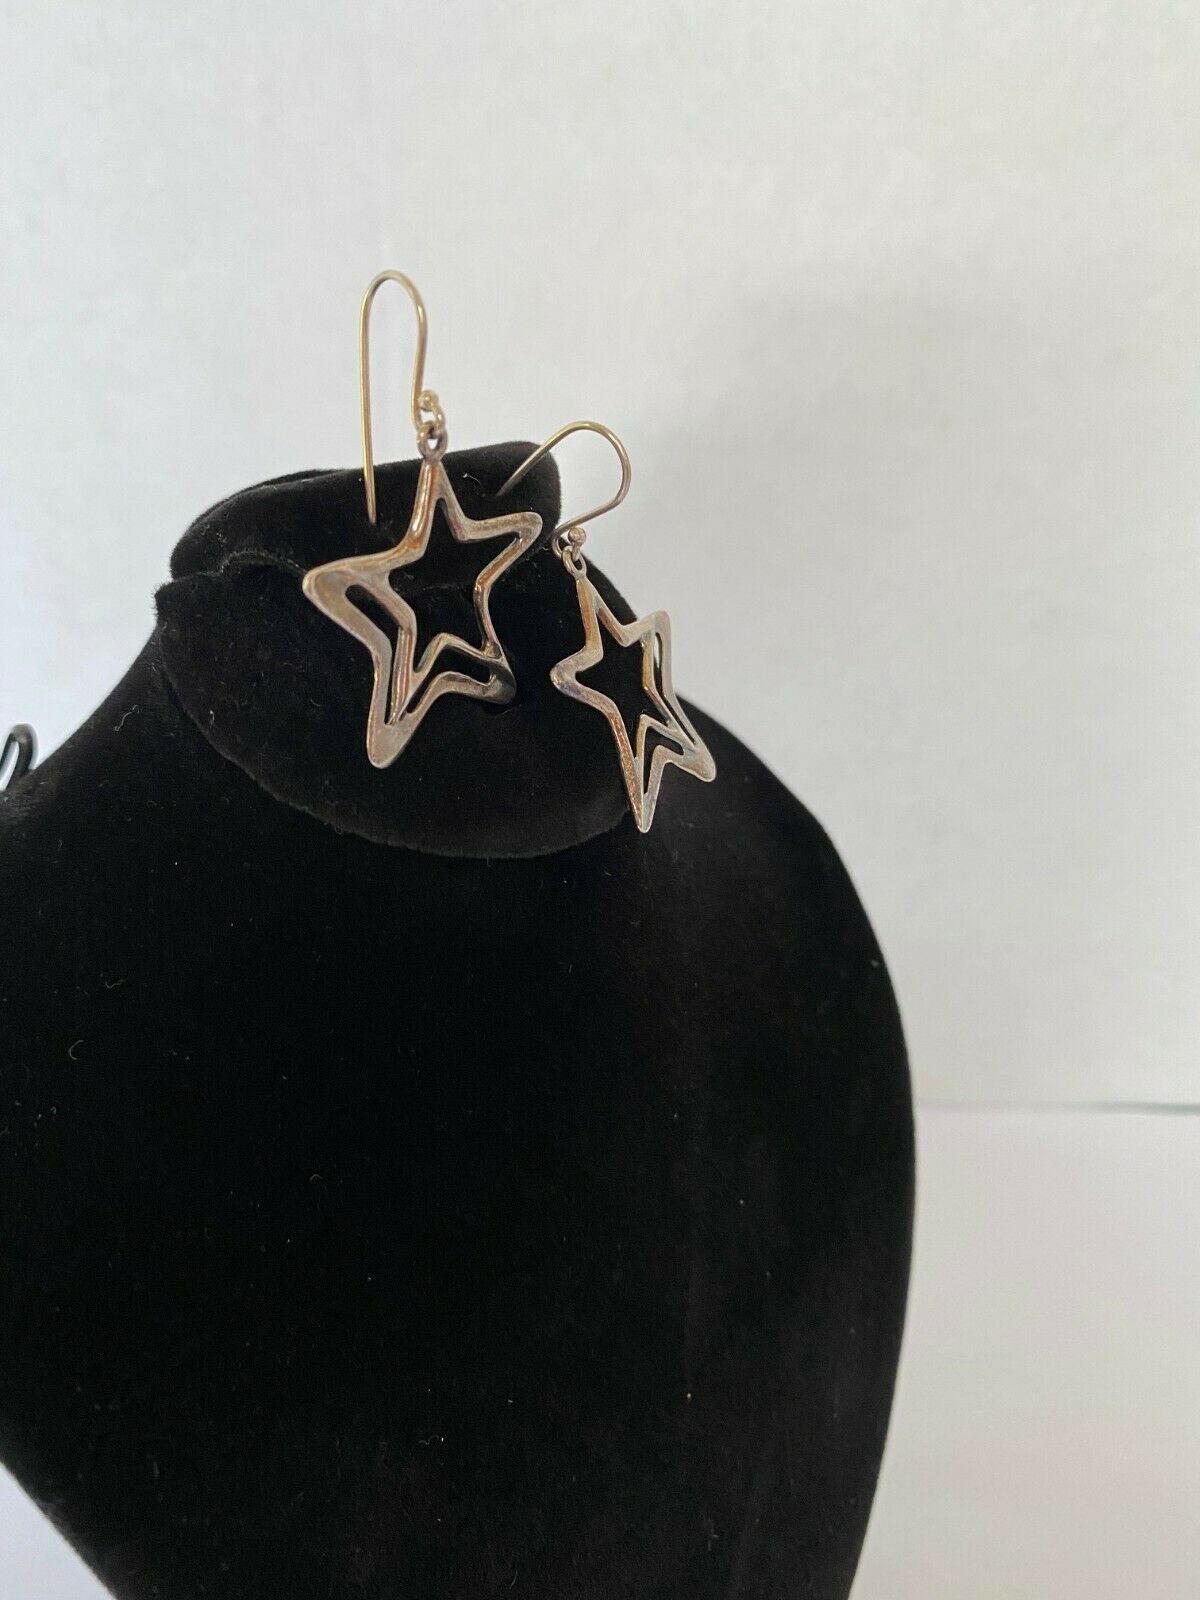 Sterling SilSterling Silver Dangling Star Earringsver Dangling Star Earrings in “as found” condition. We have not cleaned or polished this item. Marked Israel 925 and measure approximately 1½” in length and shaped like a star. Please view the images for condition and details and grade by your own grading standards. No returns.